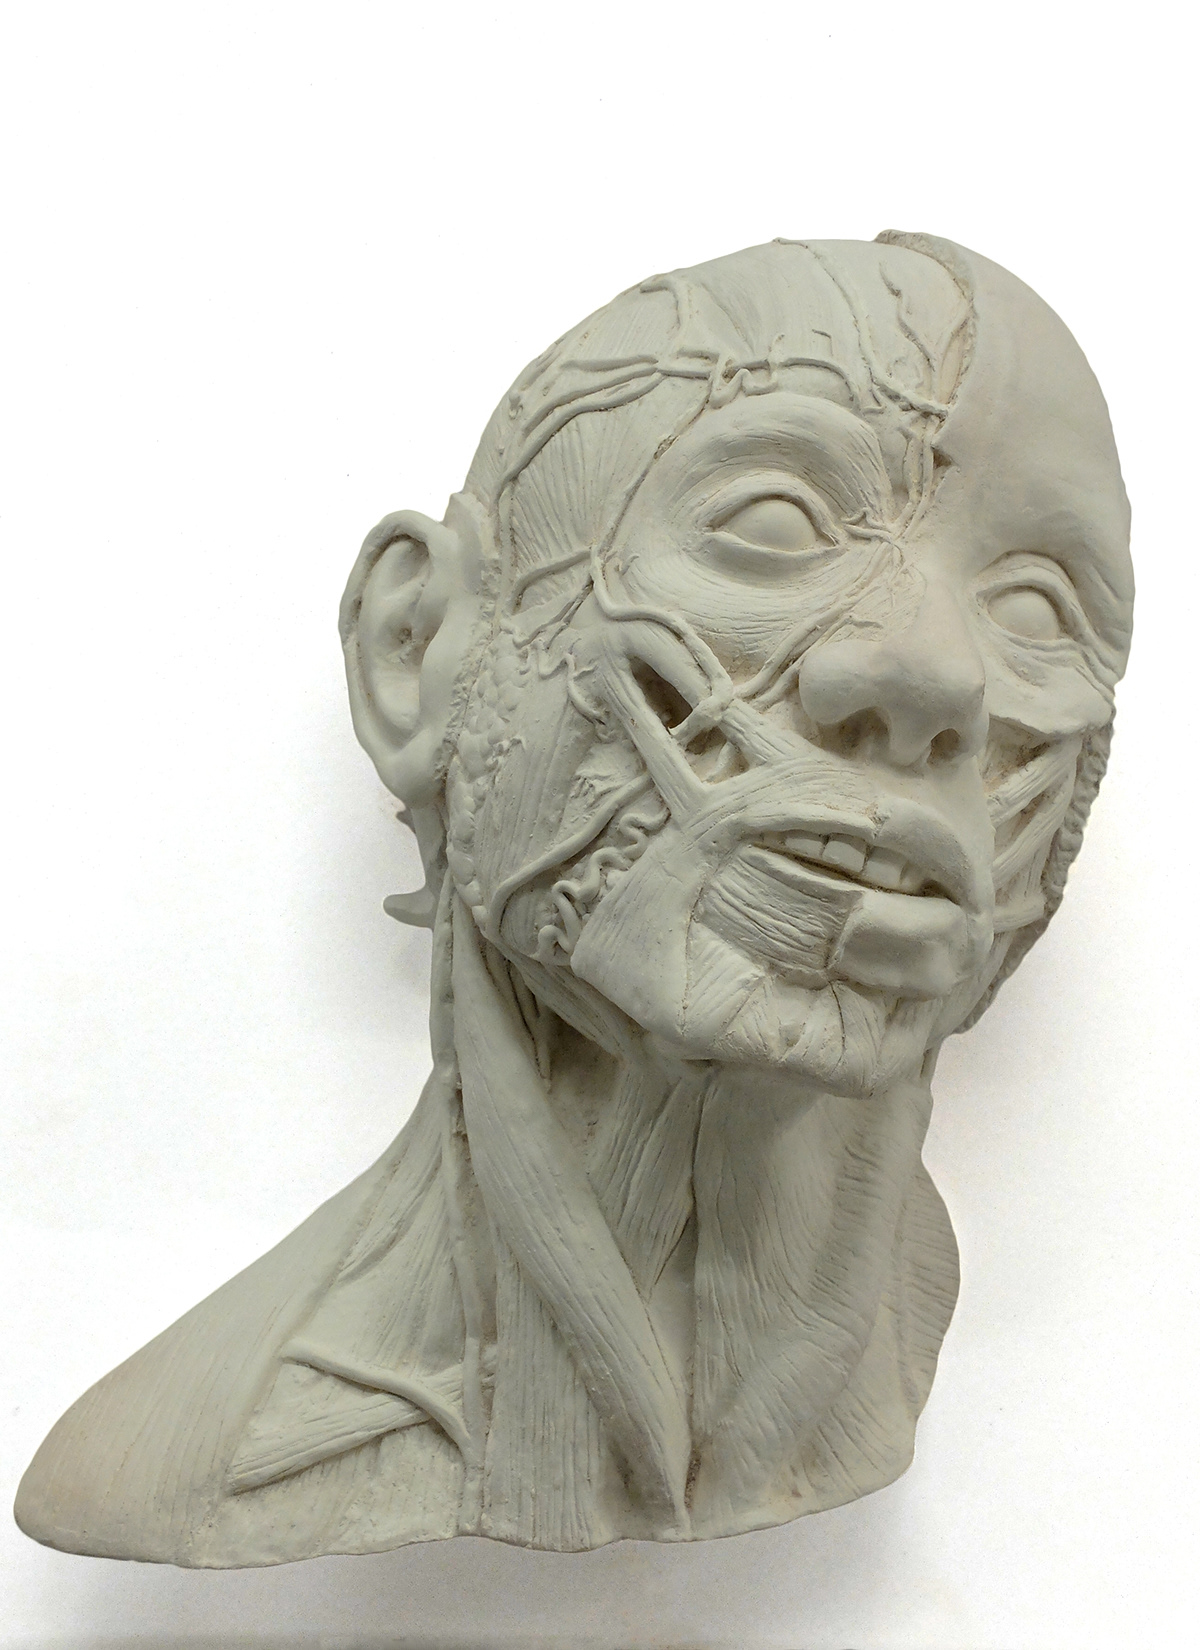 anatomy anatomical sculpture face portrait forensic reconstruction clay muscles